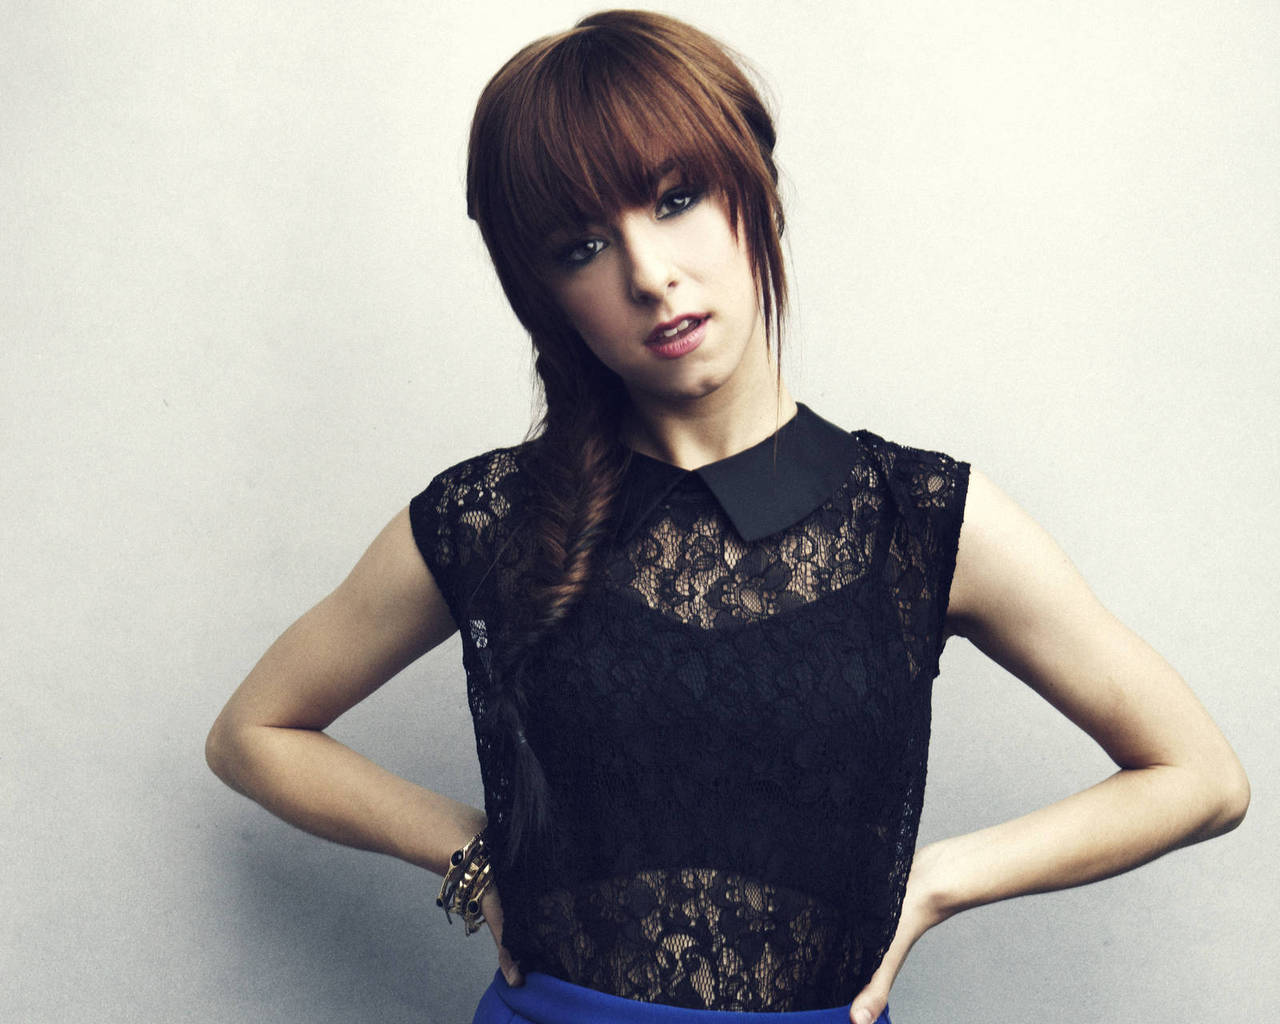 Christina Grimmie Wallpapers